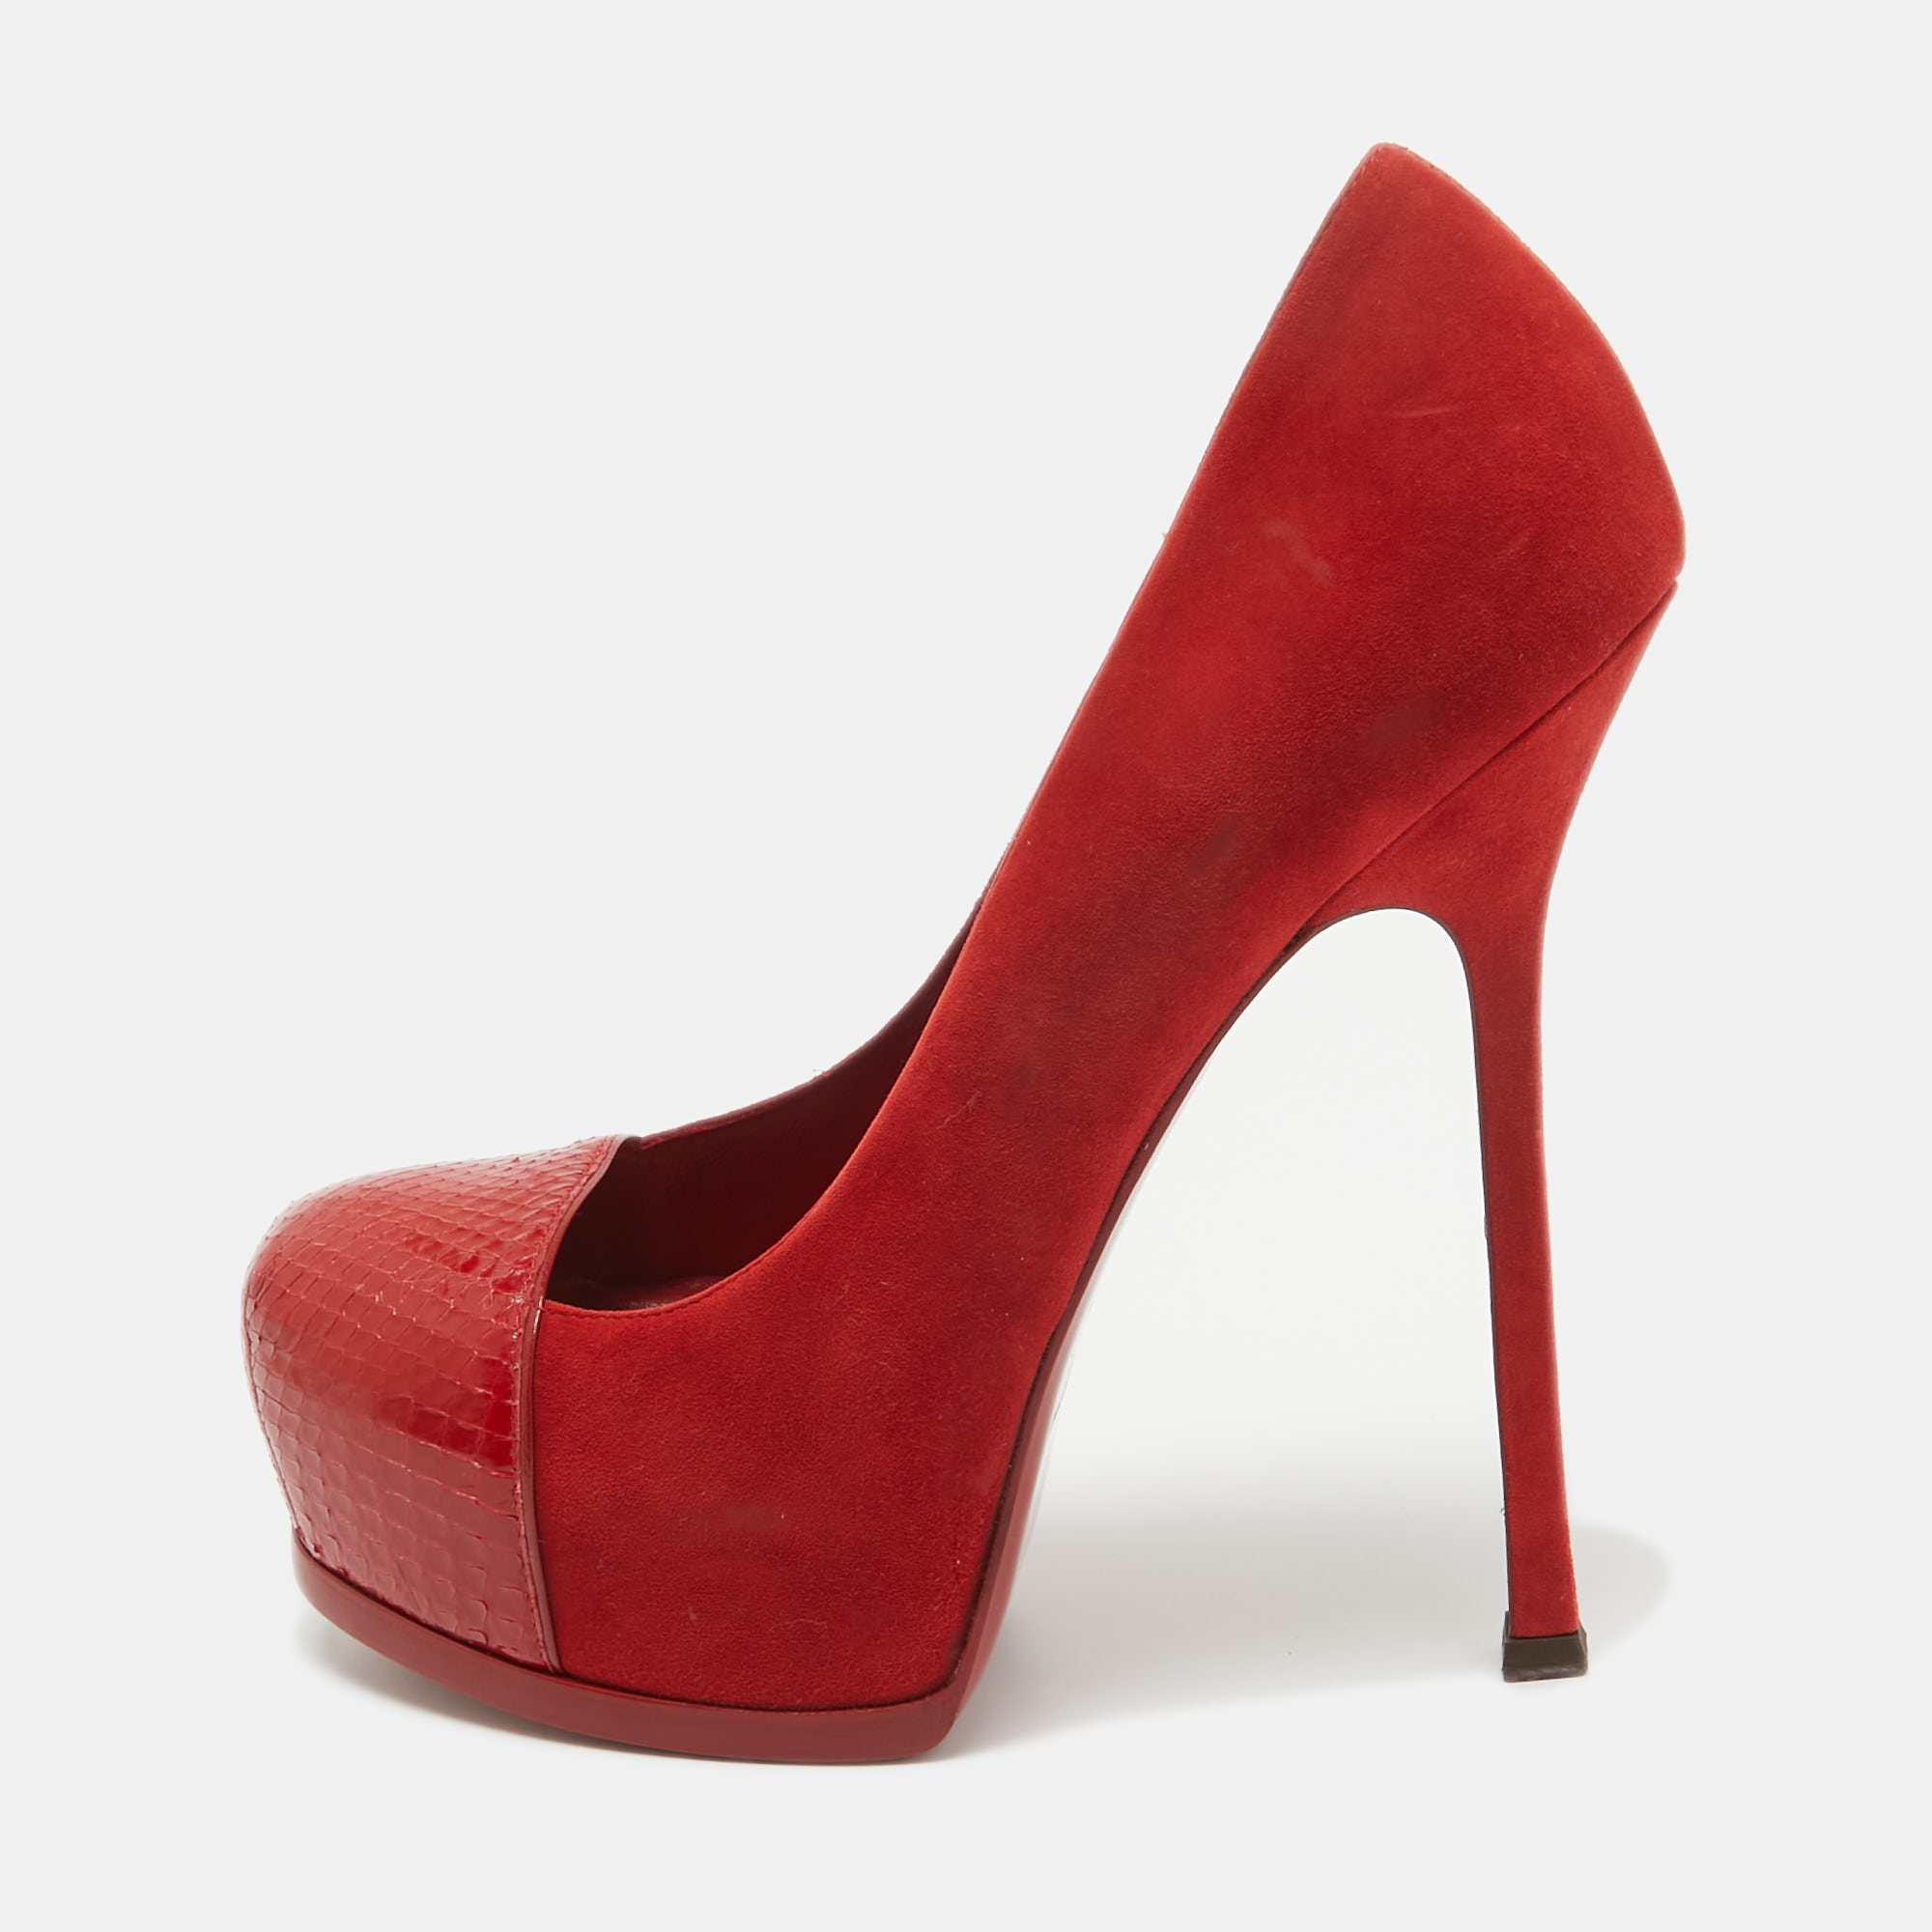 Yves saint laurent red suede and embossed python tribtoo pumps size 39